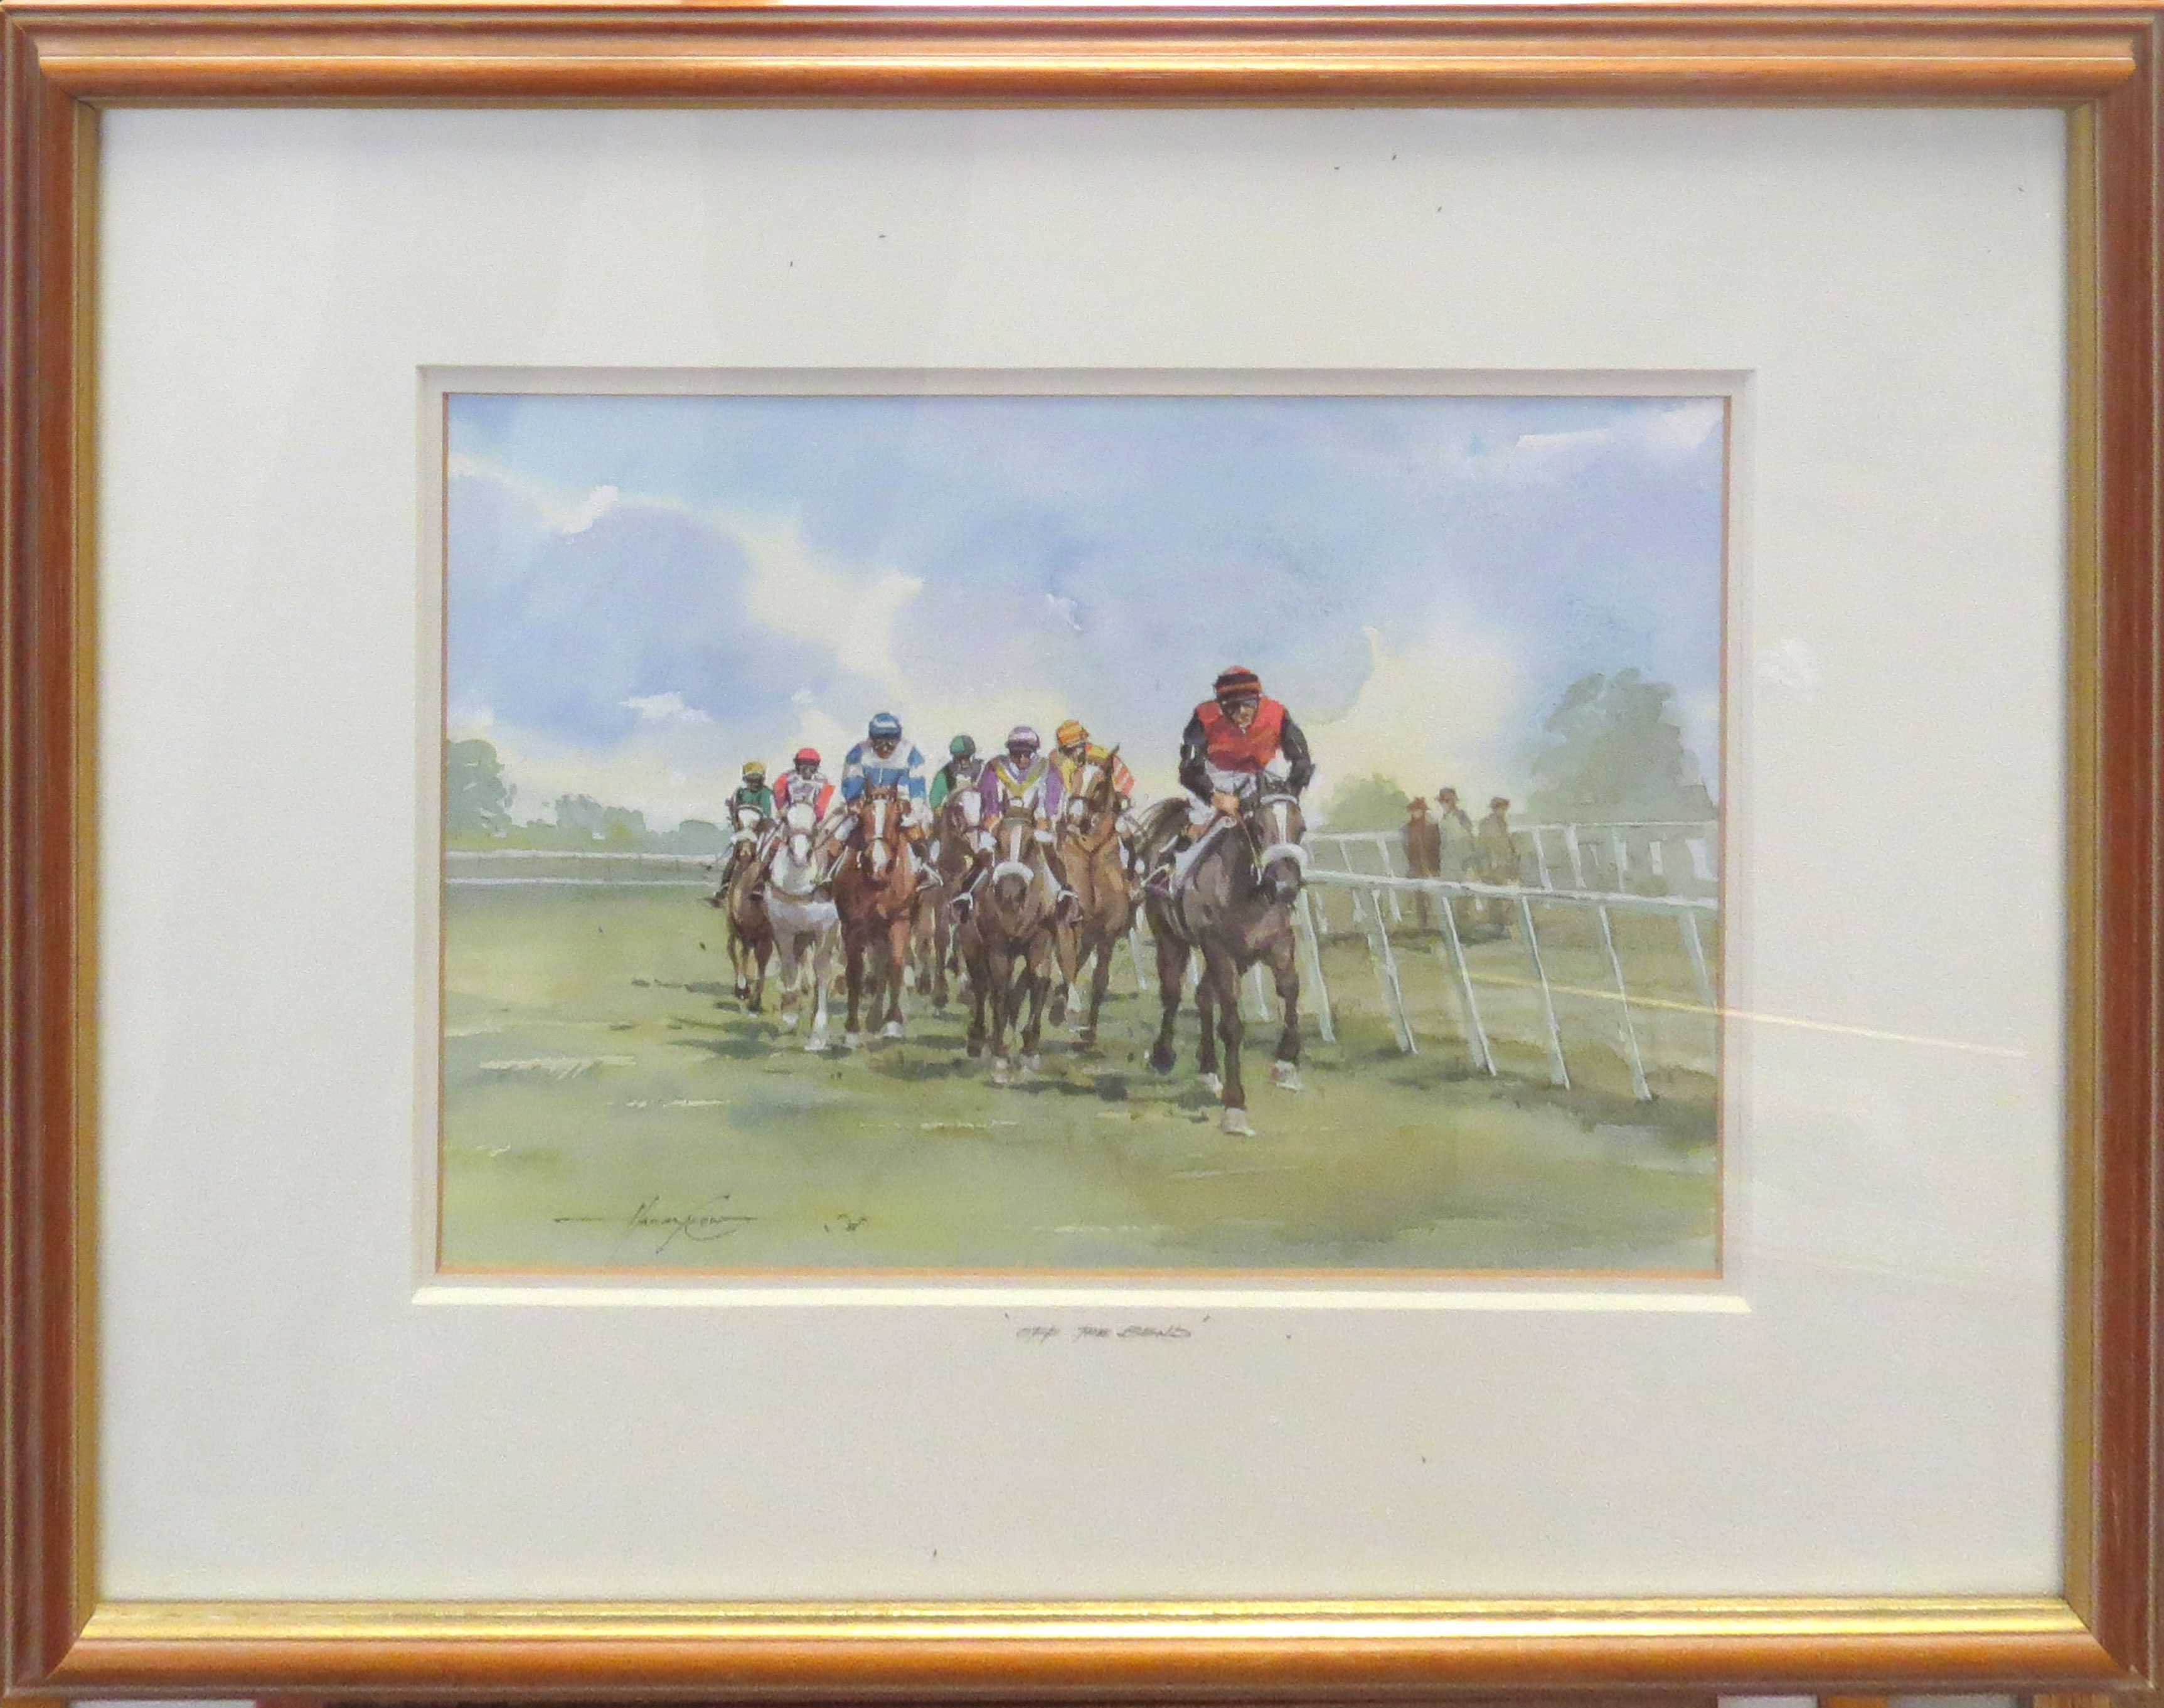 AR Harry Clow (20th Century), "Off the Bend" and "Over the Last" (Horse Racing), pair of - Image 2 of 2